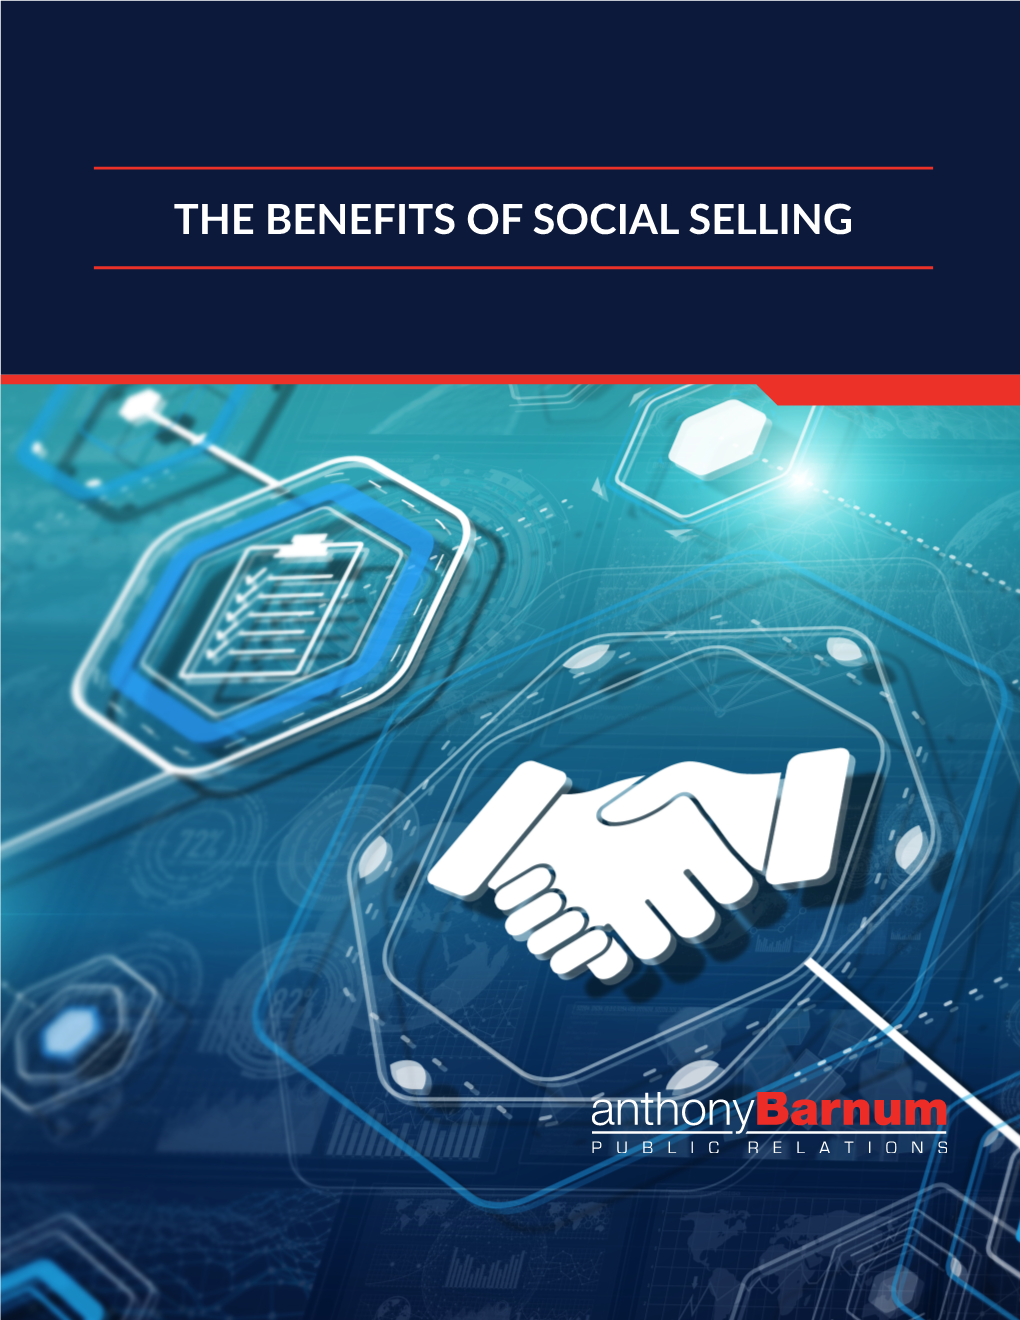 The Benefits of Social Selling